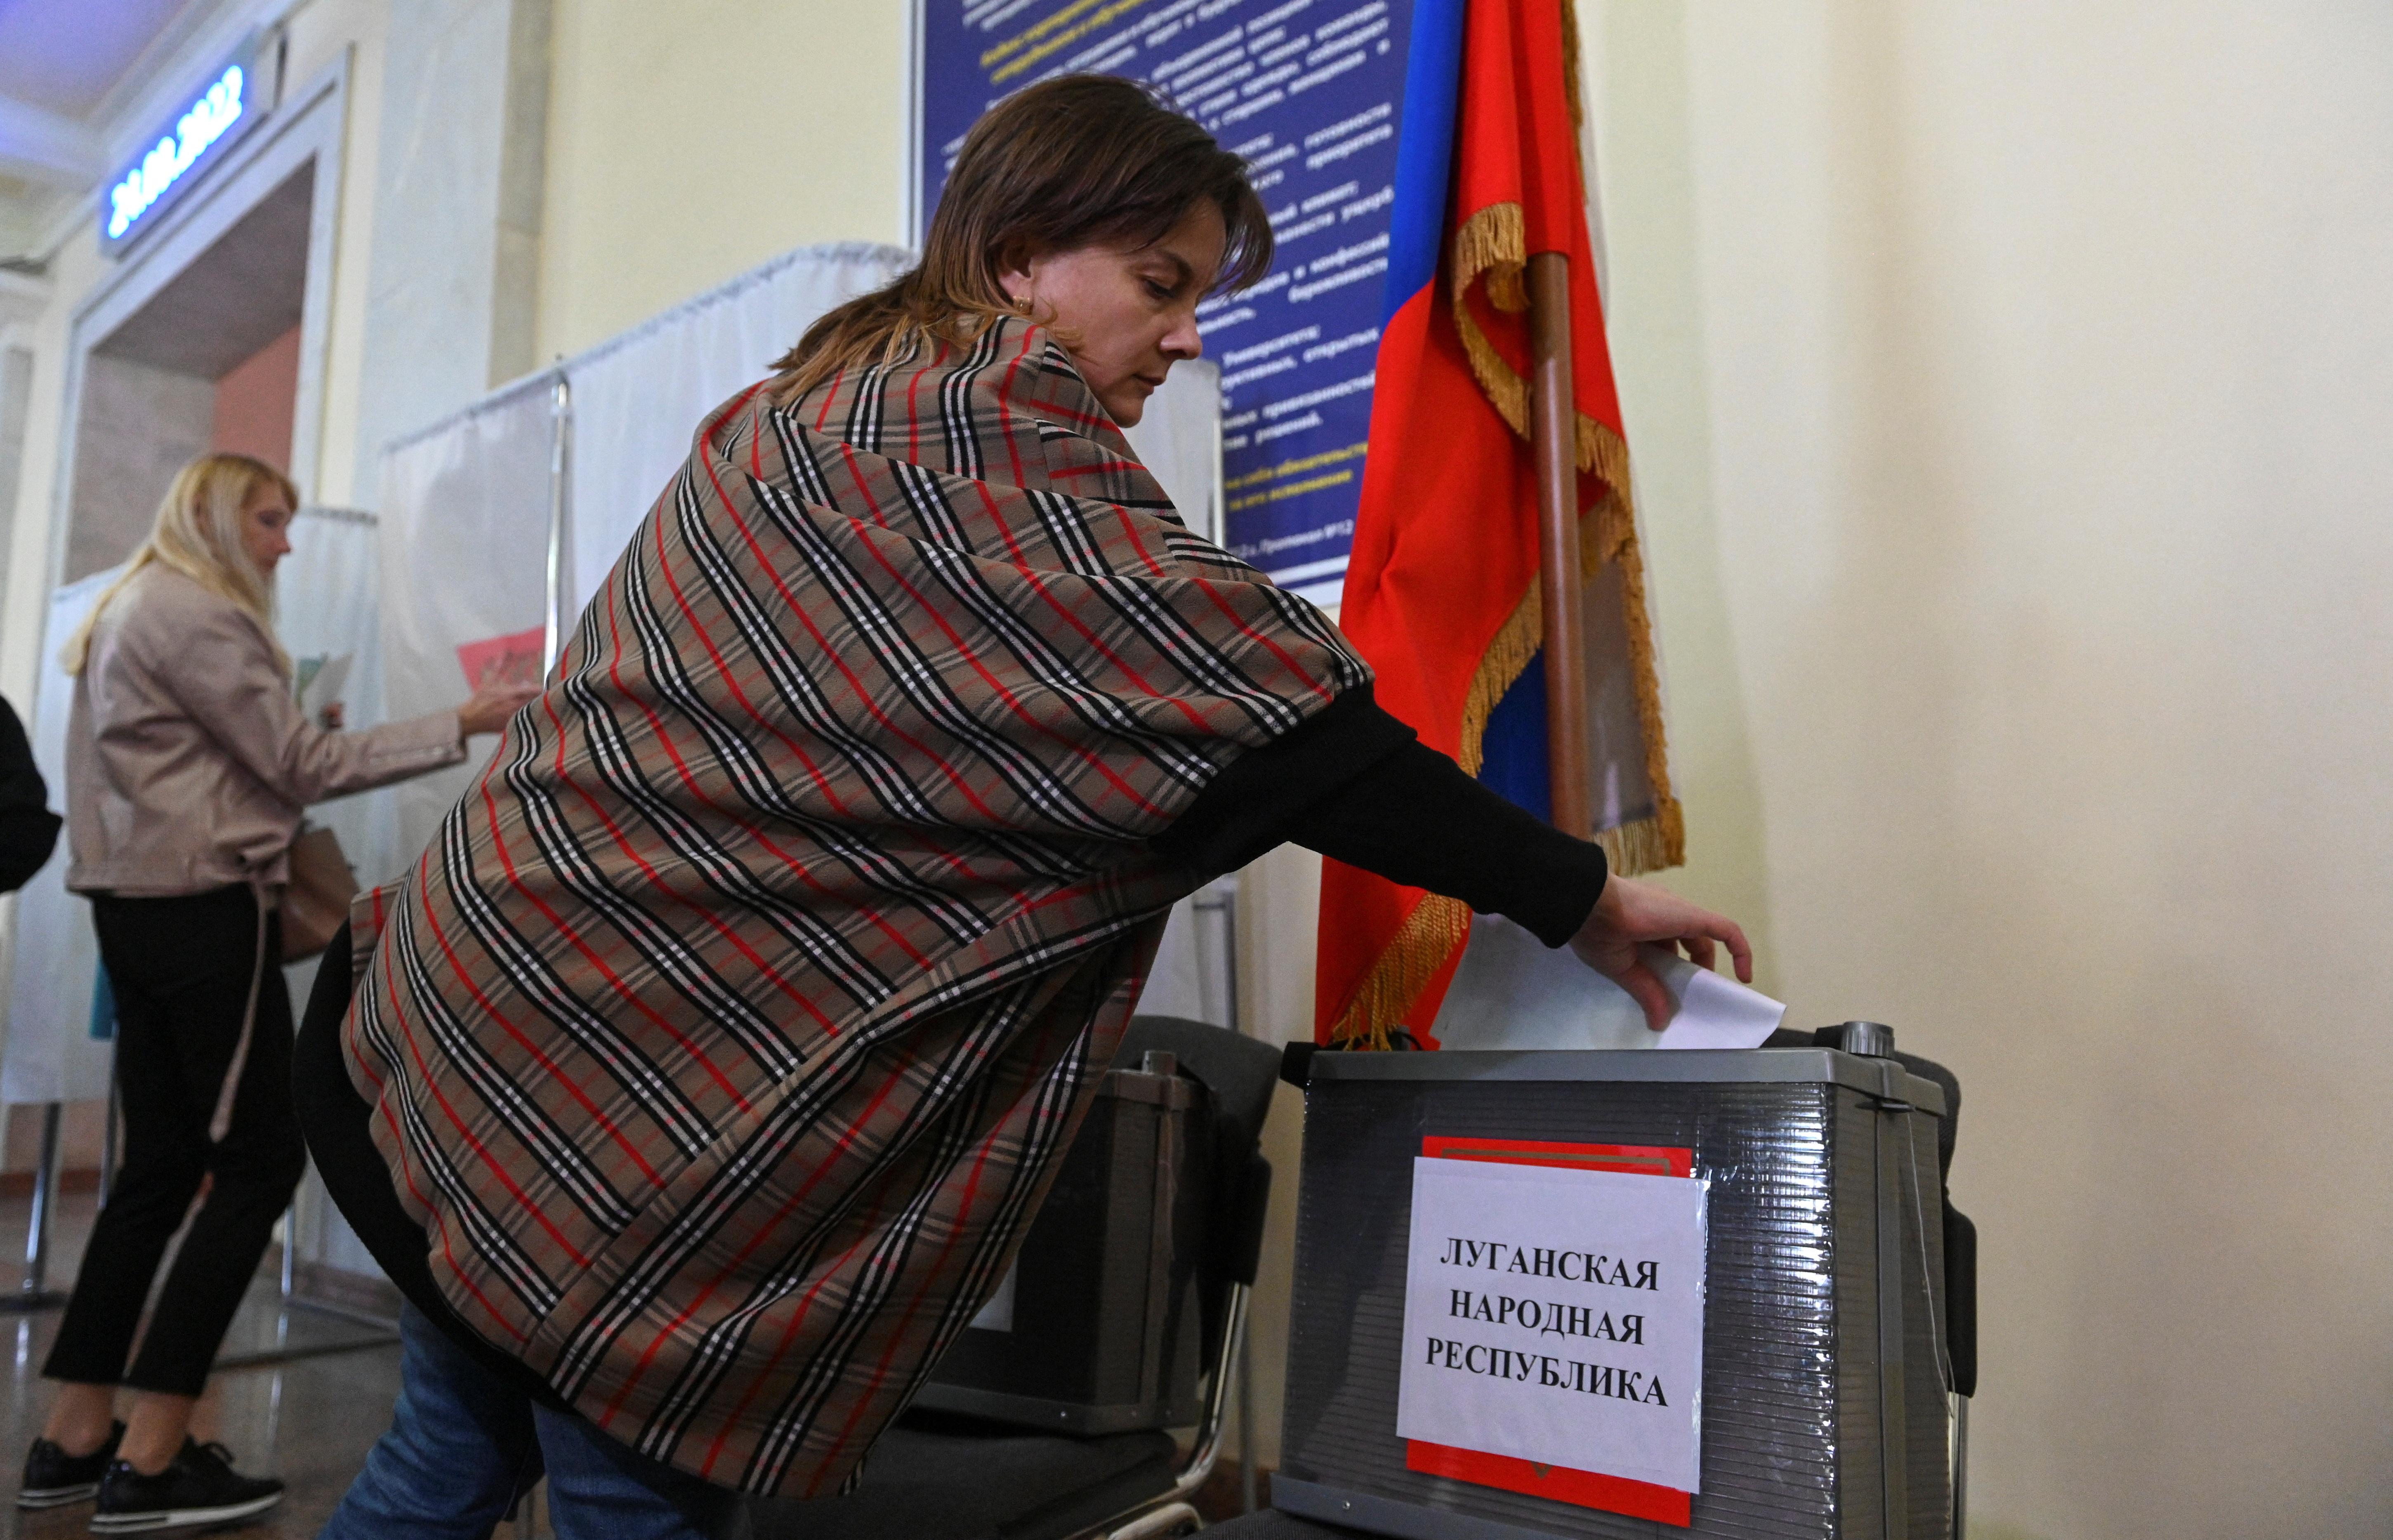 Referendum on joining of Russian-controlled regions of Ukraine to Russia in Rostov-on-Don